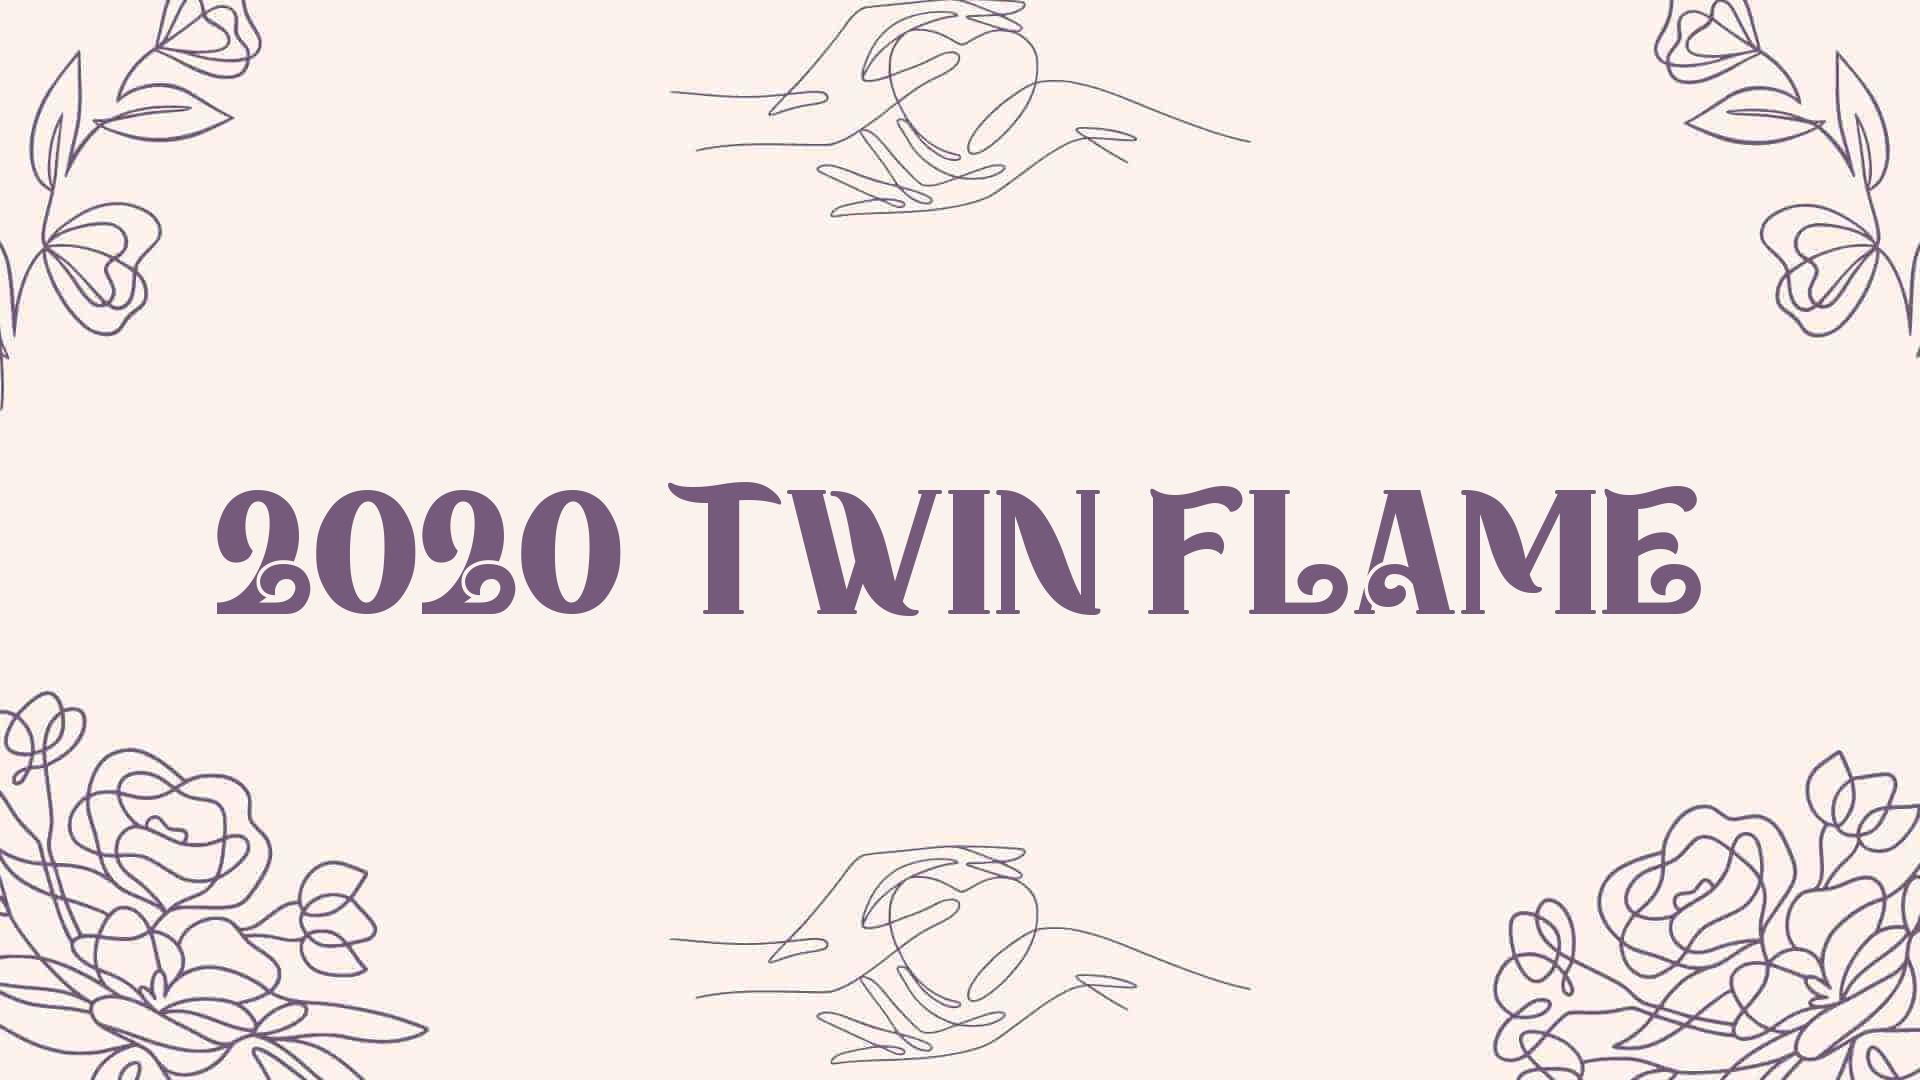 2020 twin flame [ Meaning Revealed ]